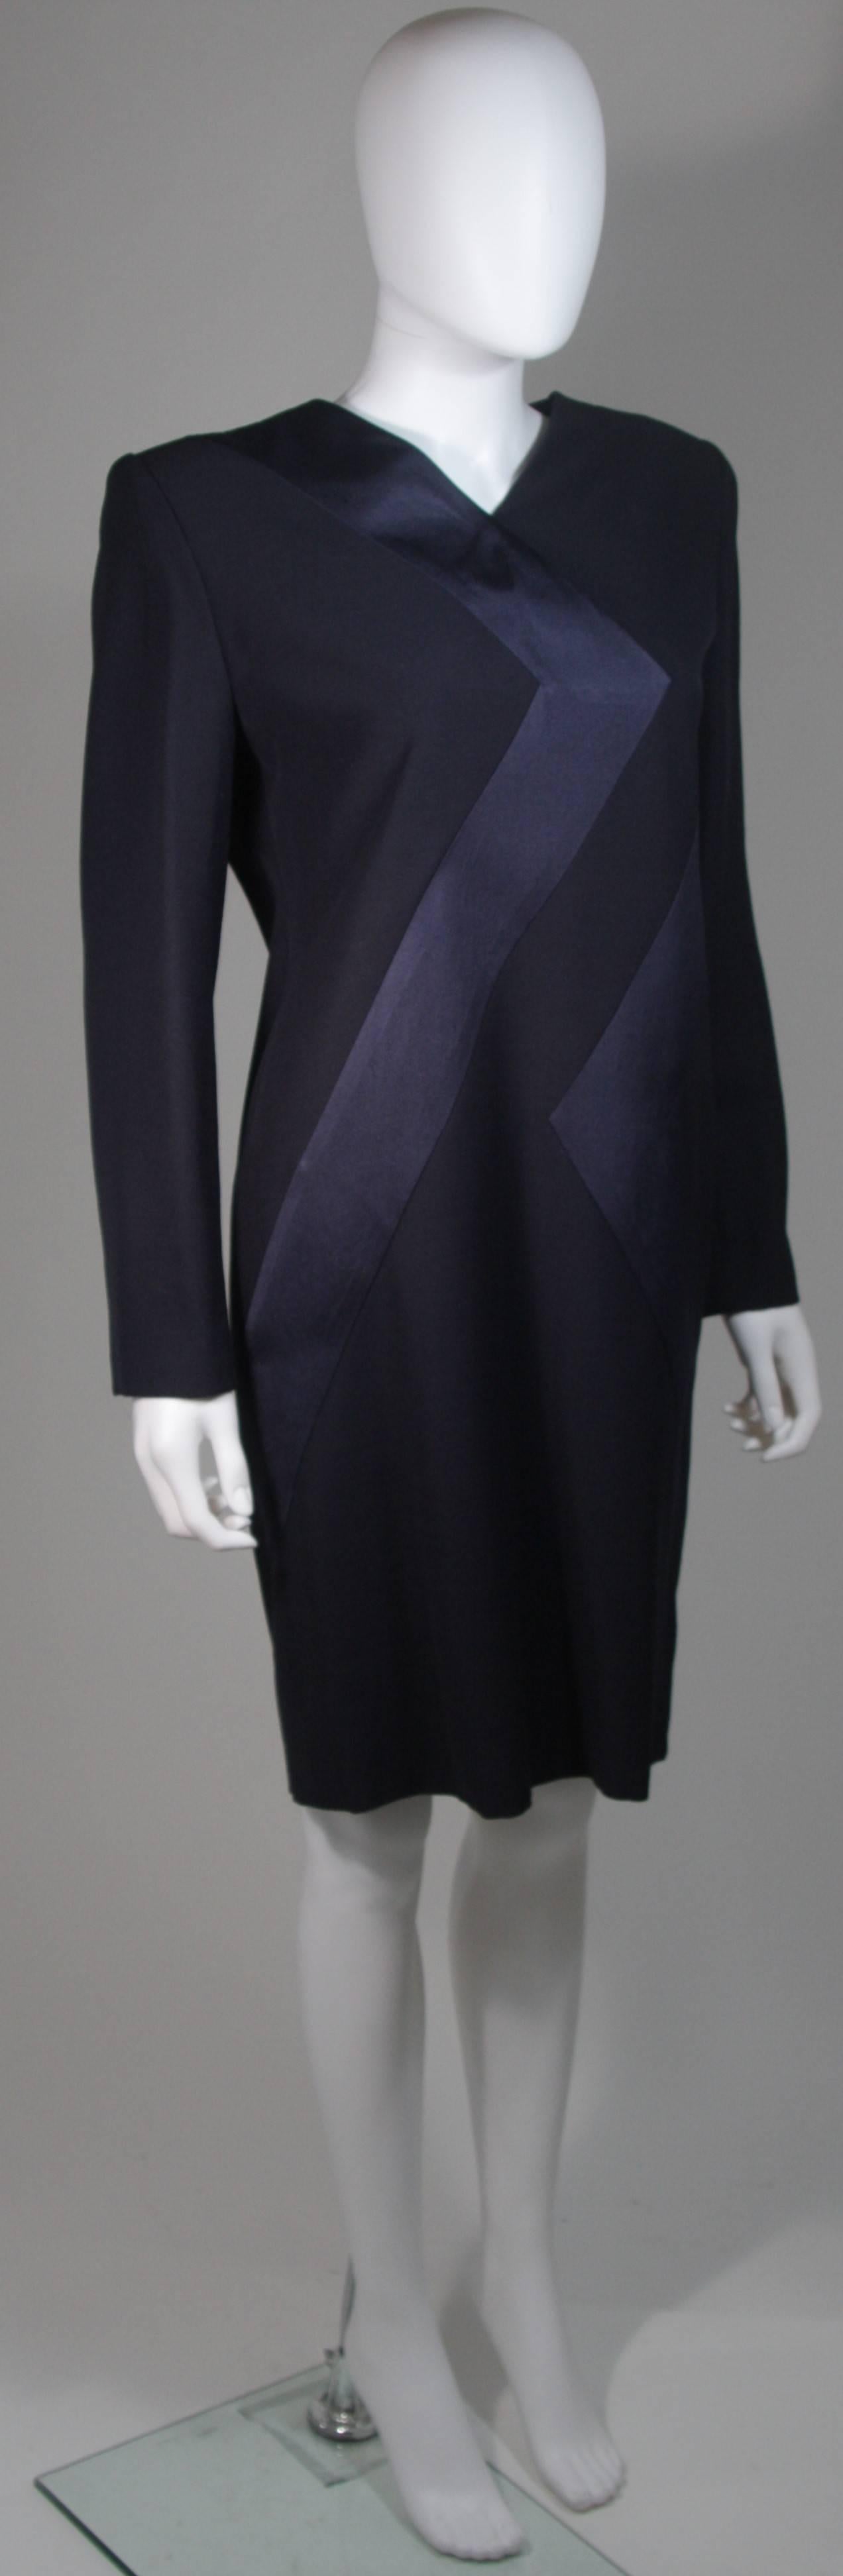 Galanos Navy Silk Cocktail Dress with Geometric Design Size Small Medium In Excellent Condition For Sale In Los Angeles, CA